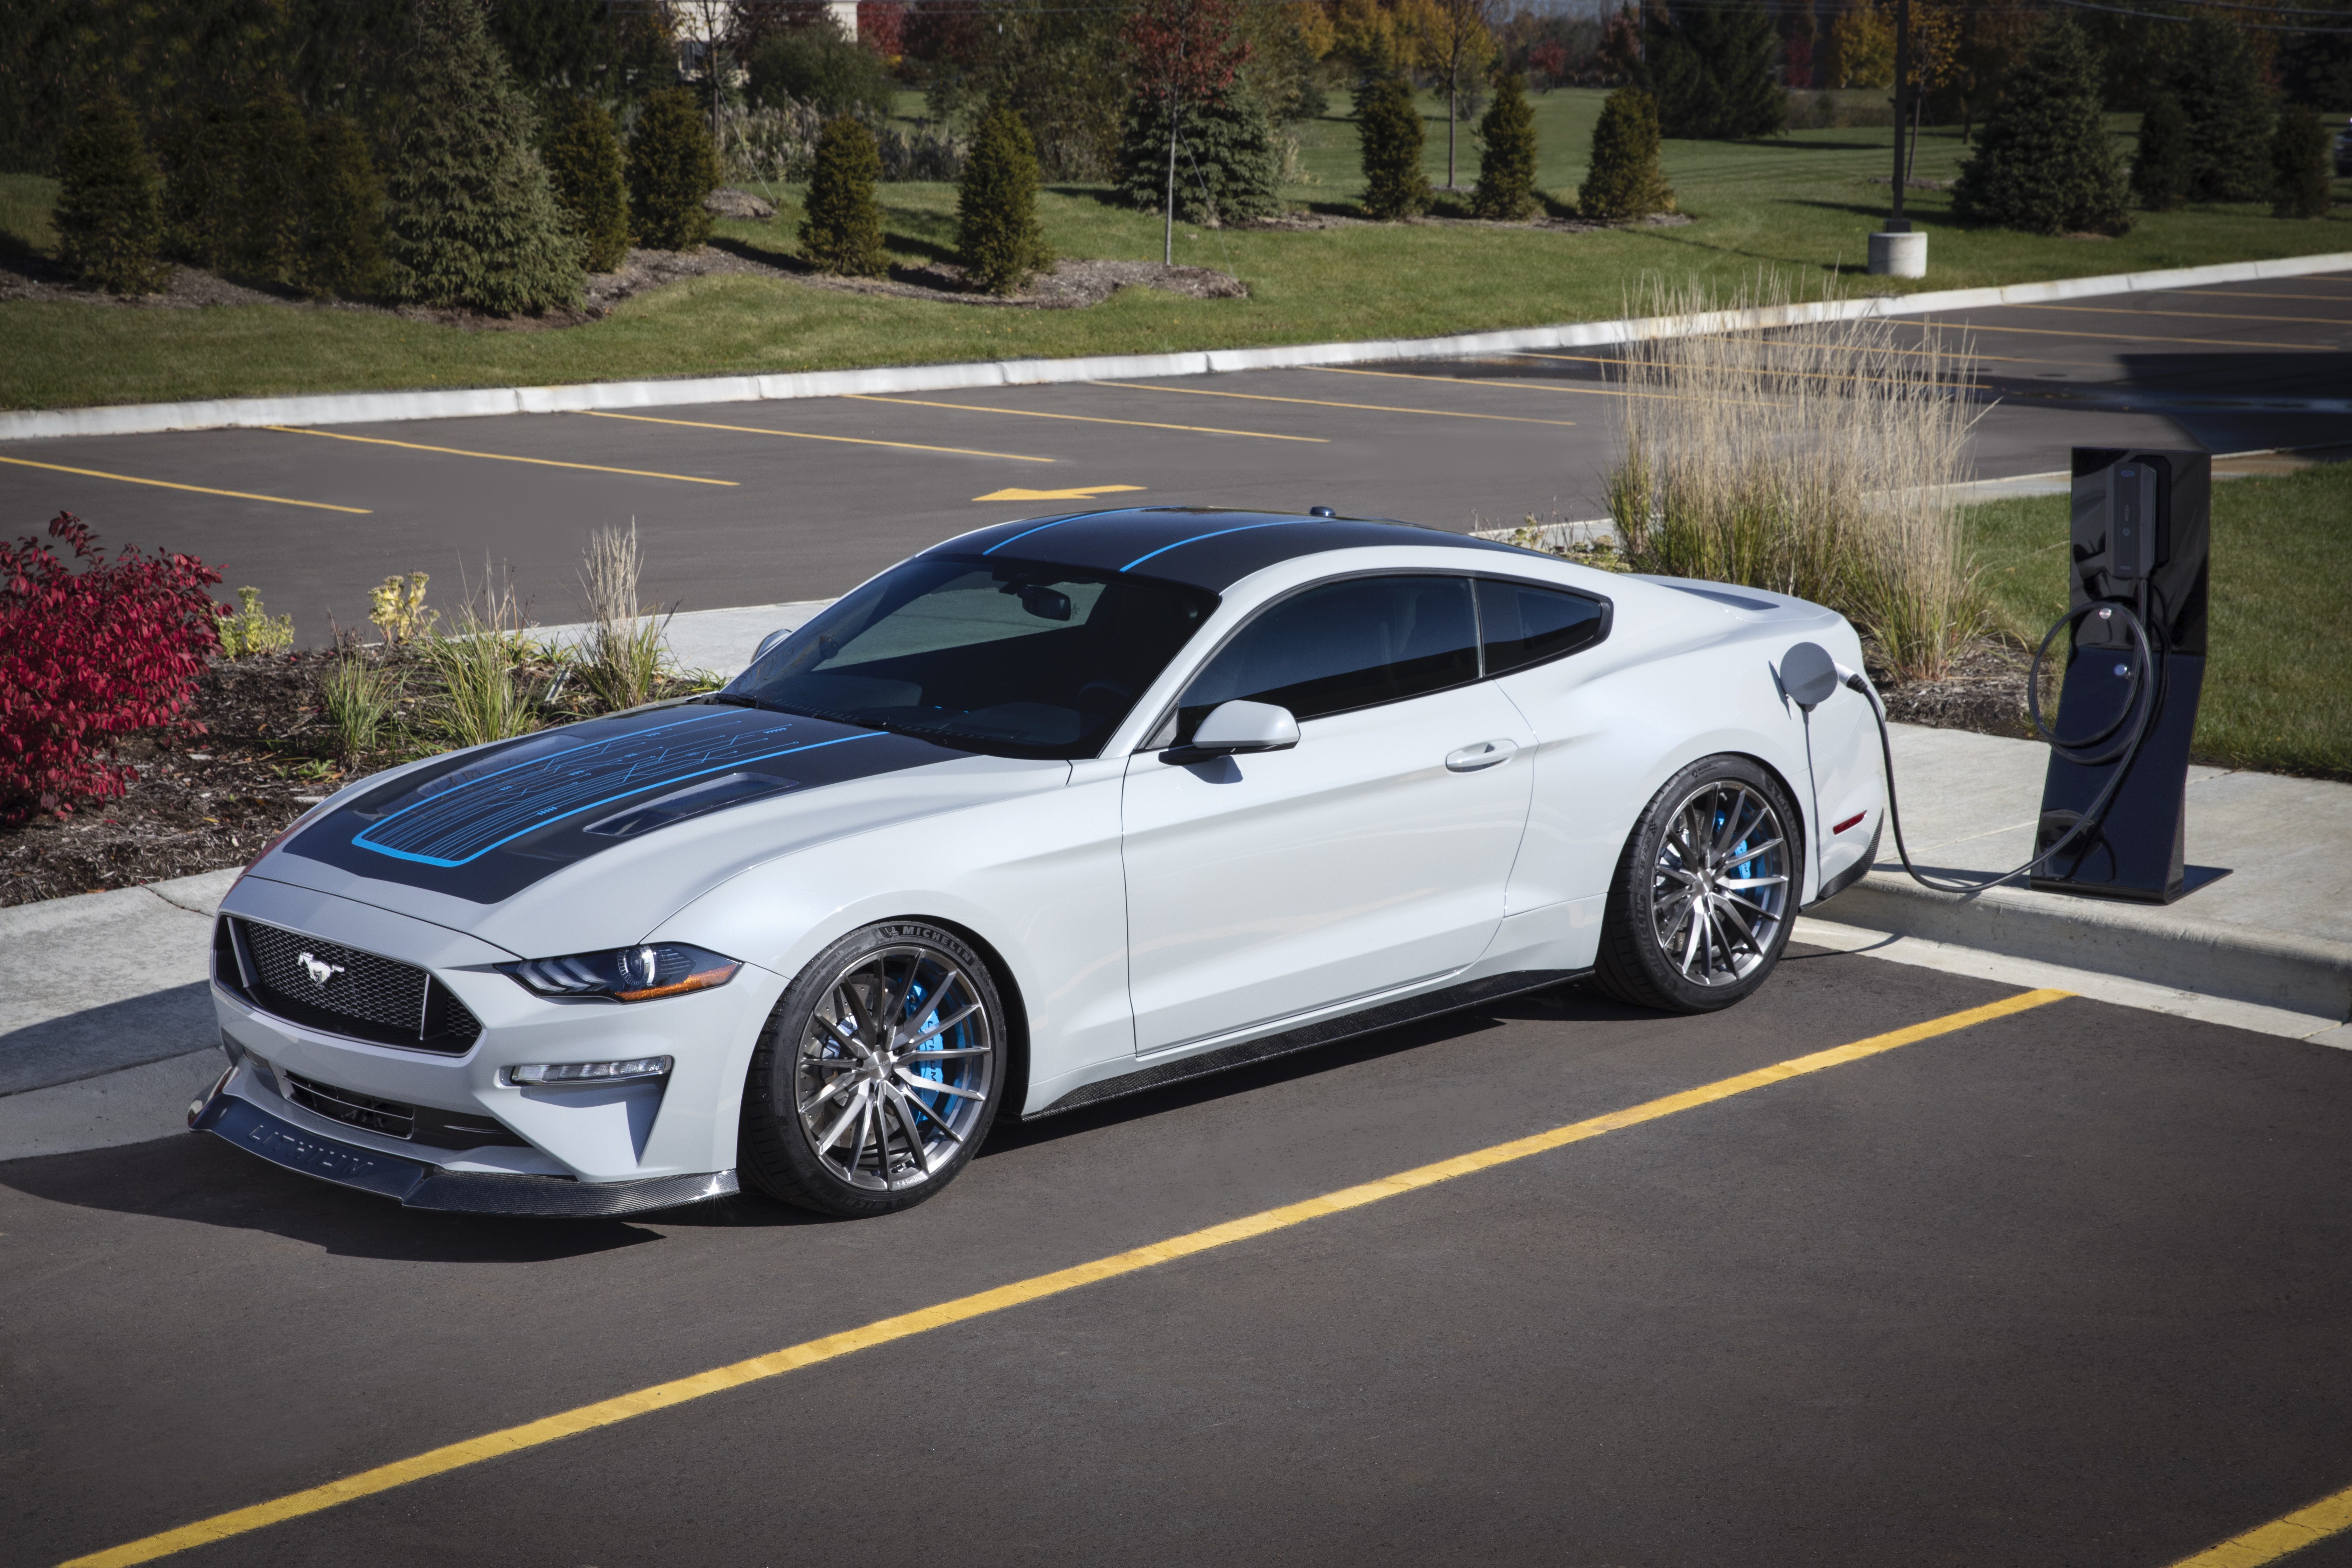 Ford and Webasto today reveal Mustang Lithium, an ultra-high-performance battery-electric Mustang fastback prototype. With more than 1,000 ft.-lbs. of torque and more than 900 horsepower inst